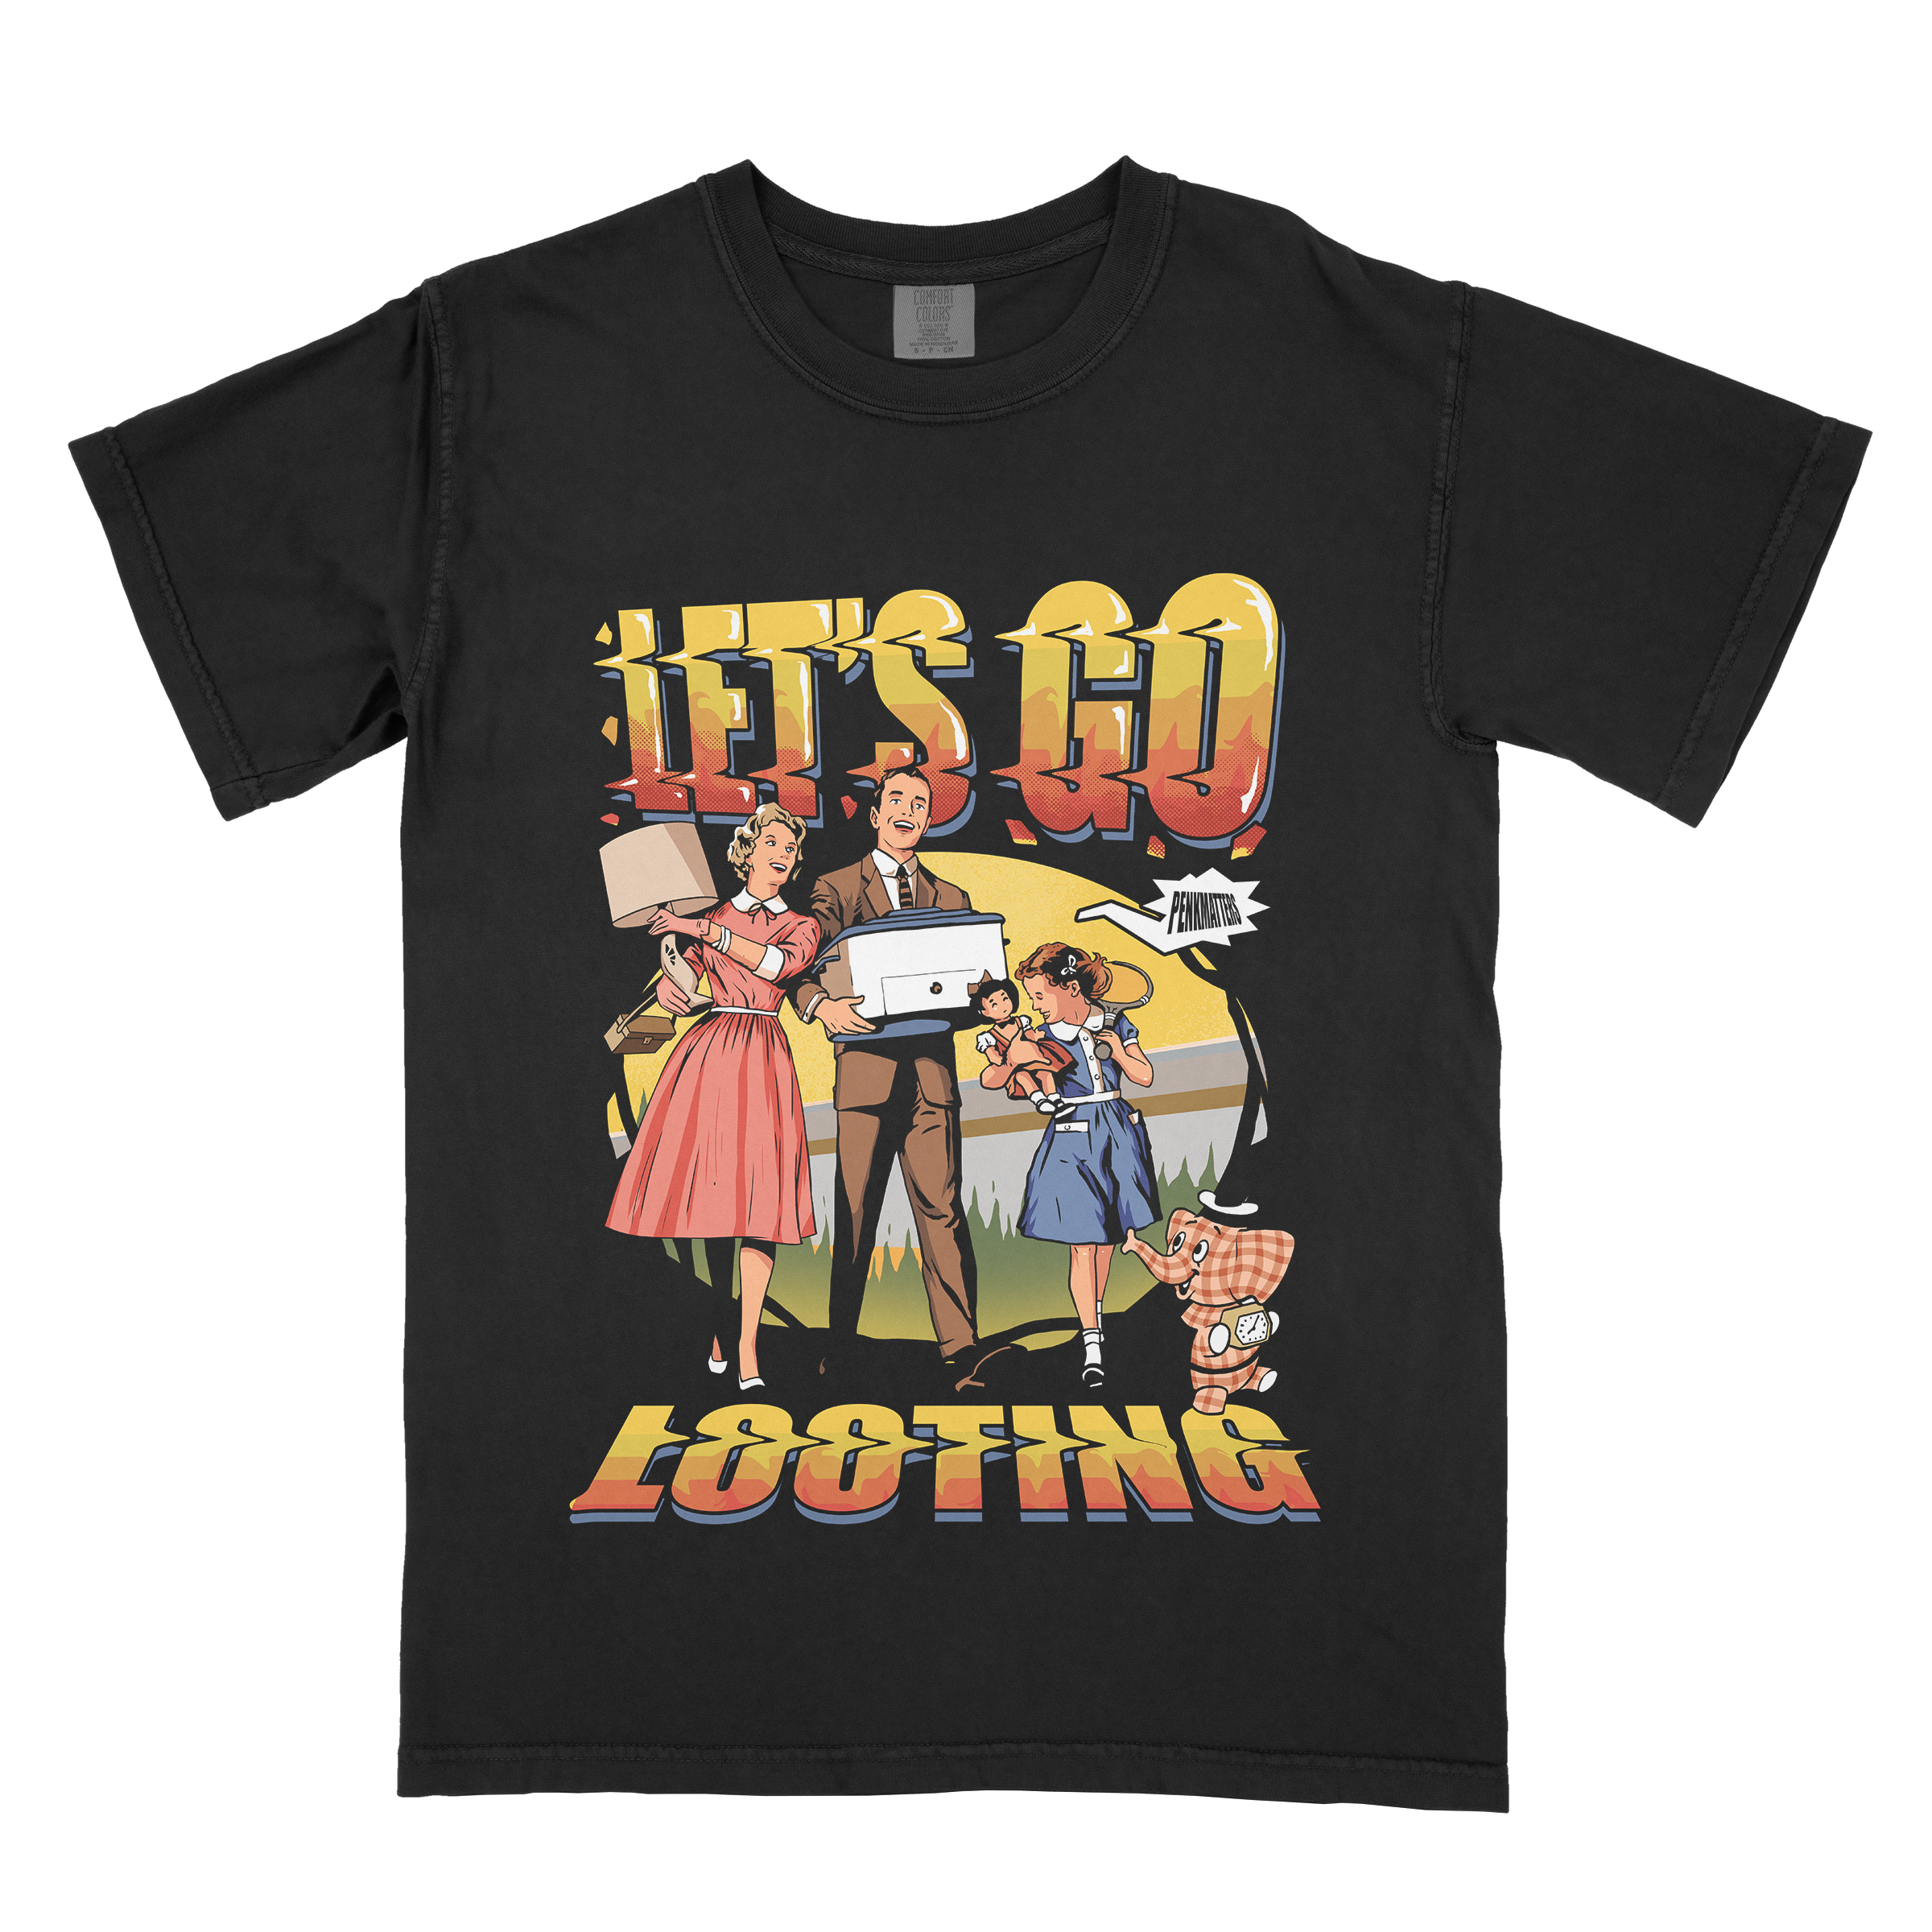 "Let's Go Looting" T-Shirt